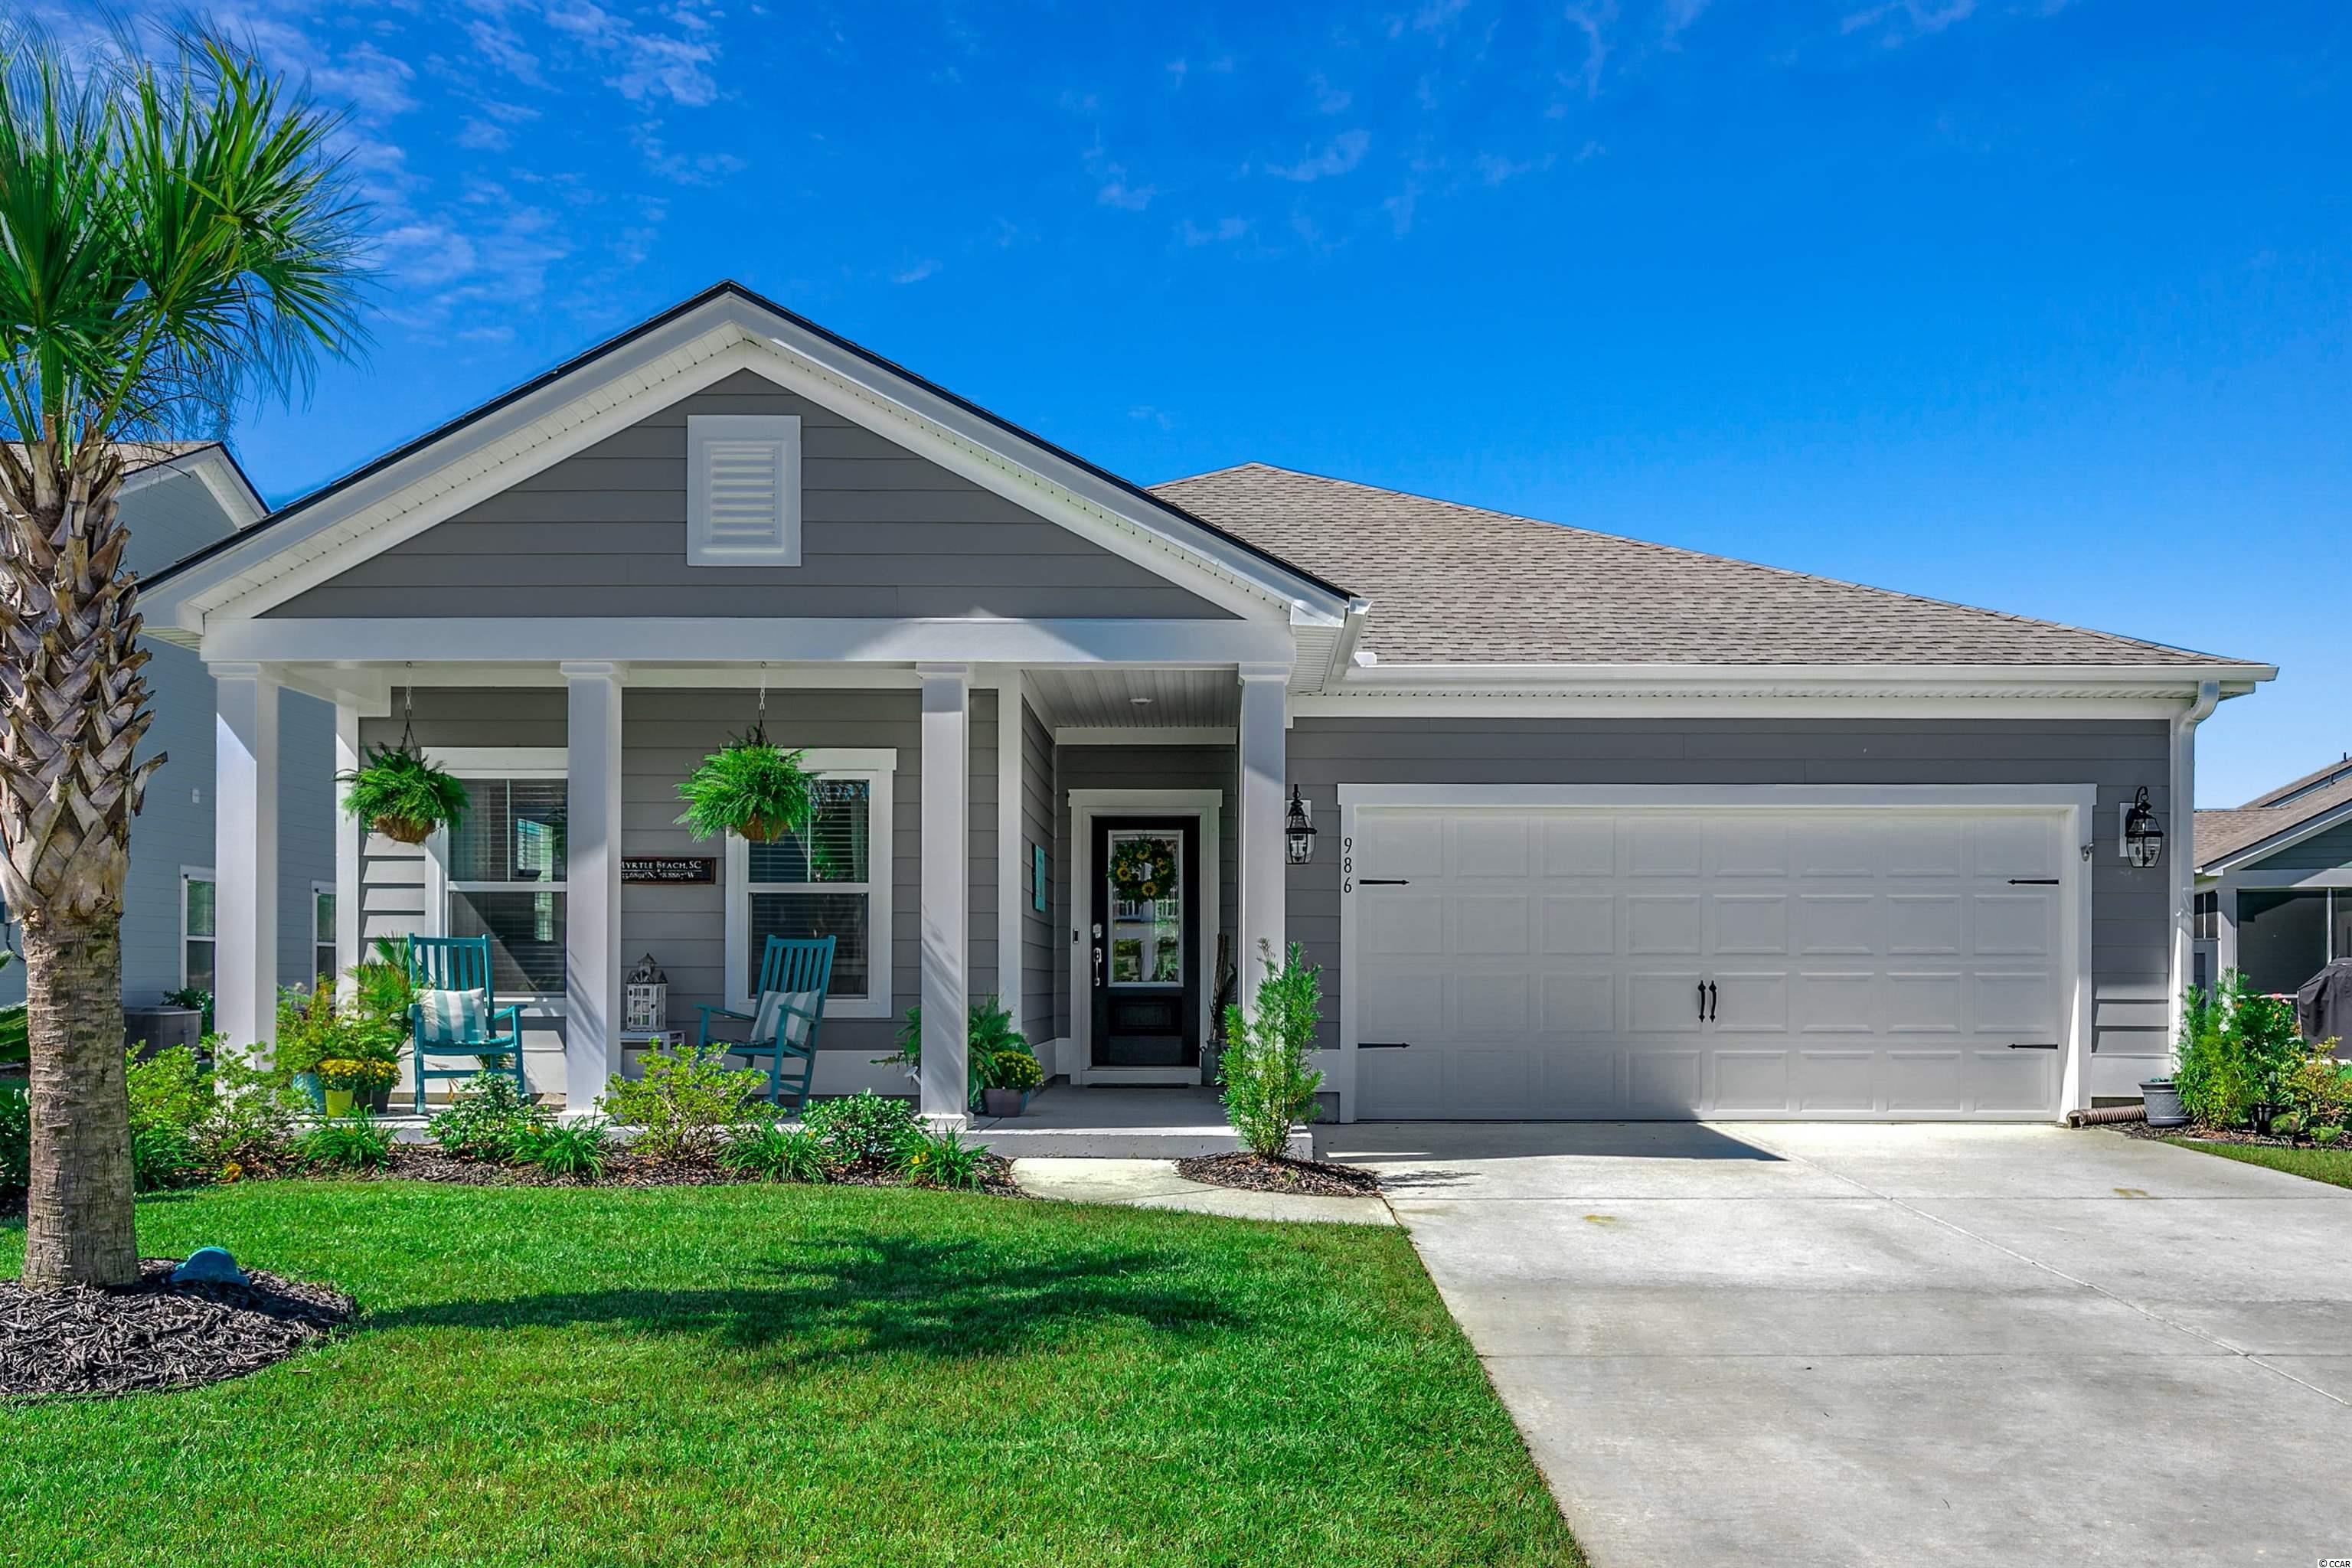 986 Mourning Dove Dr. Myrtle Beach, SC 29577